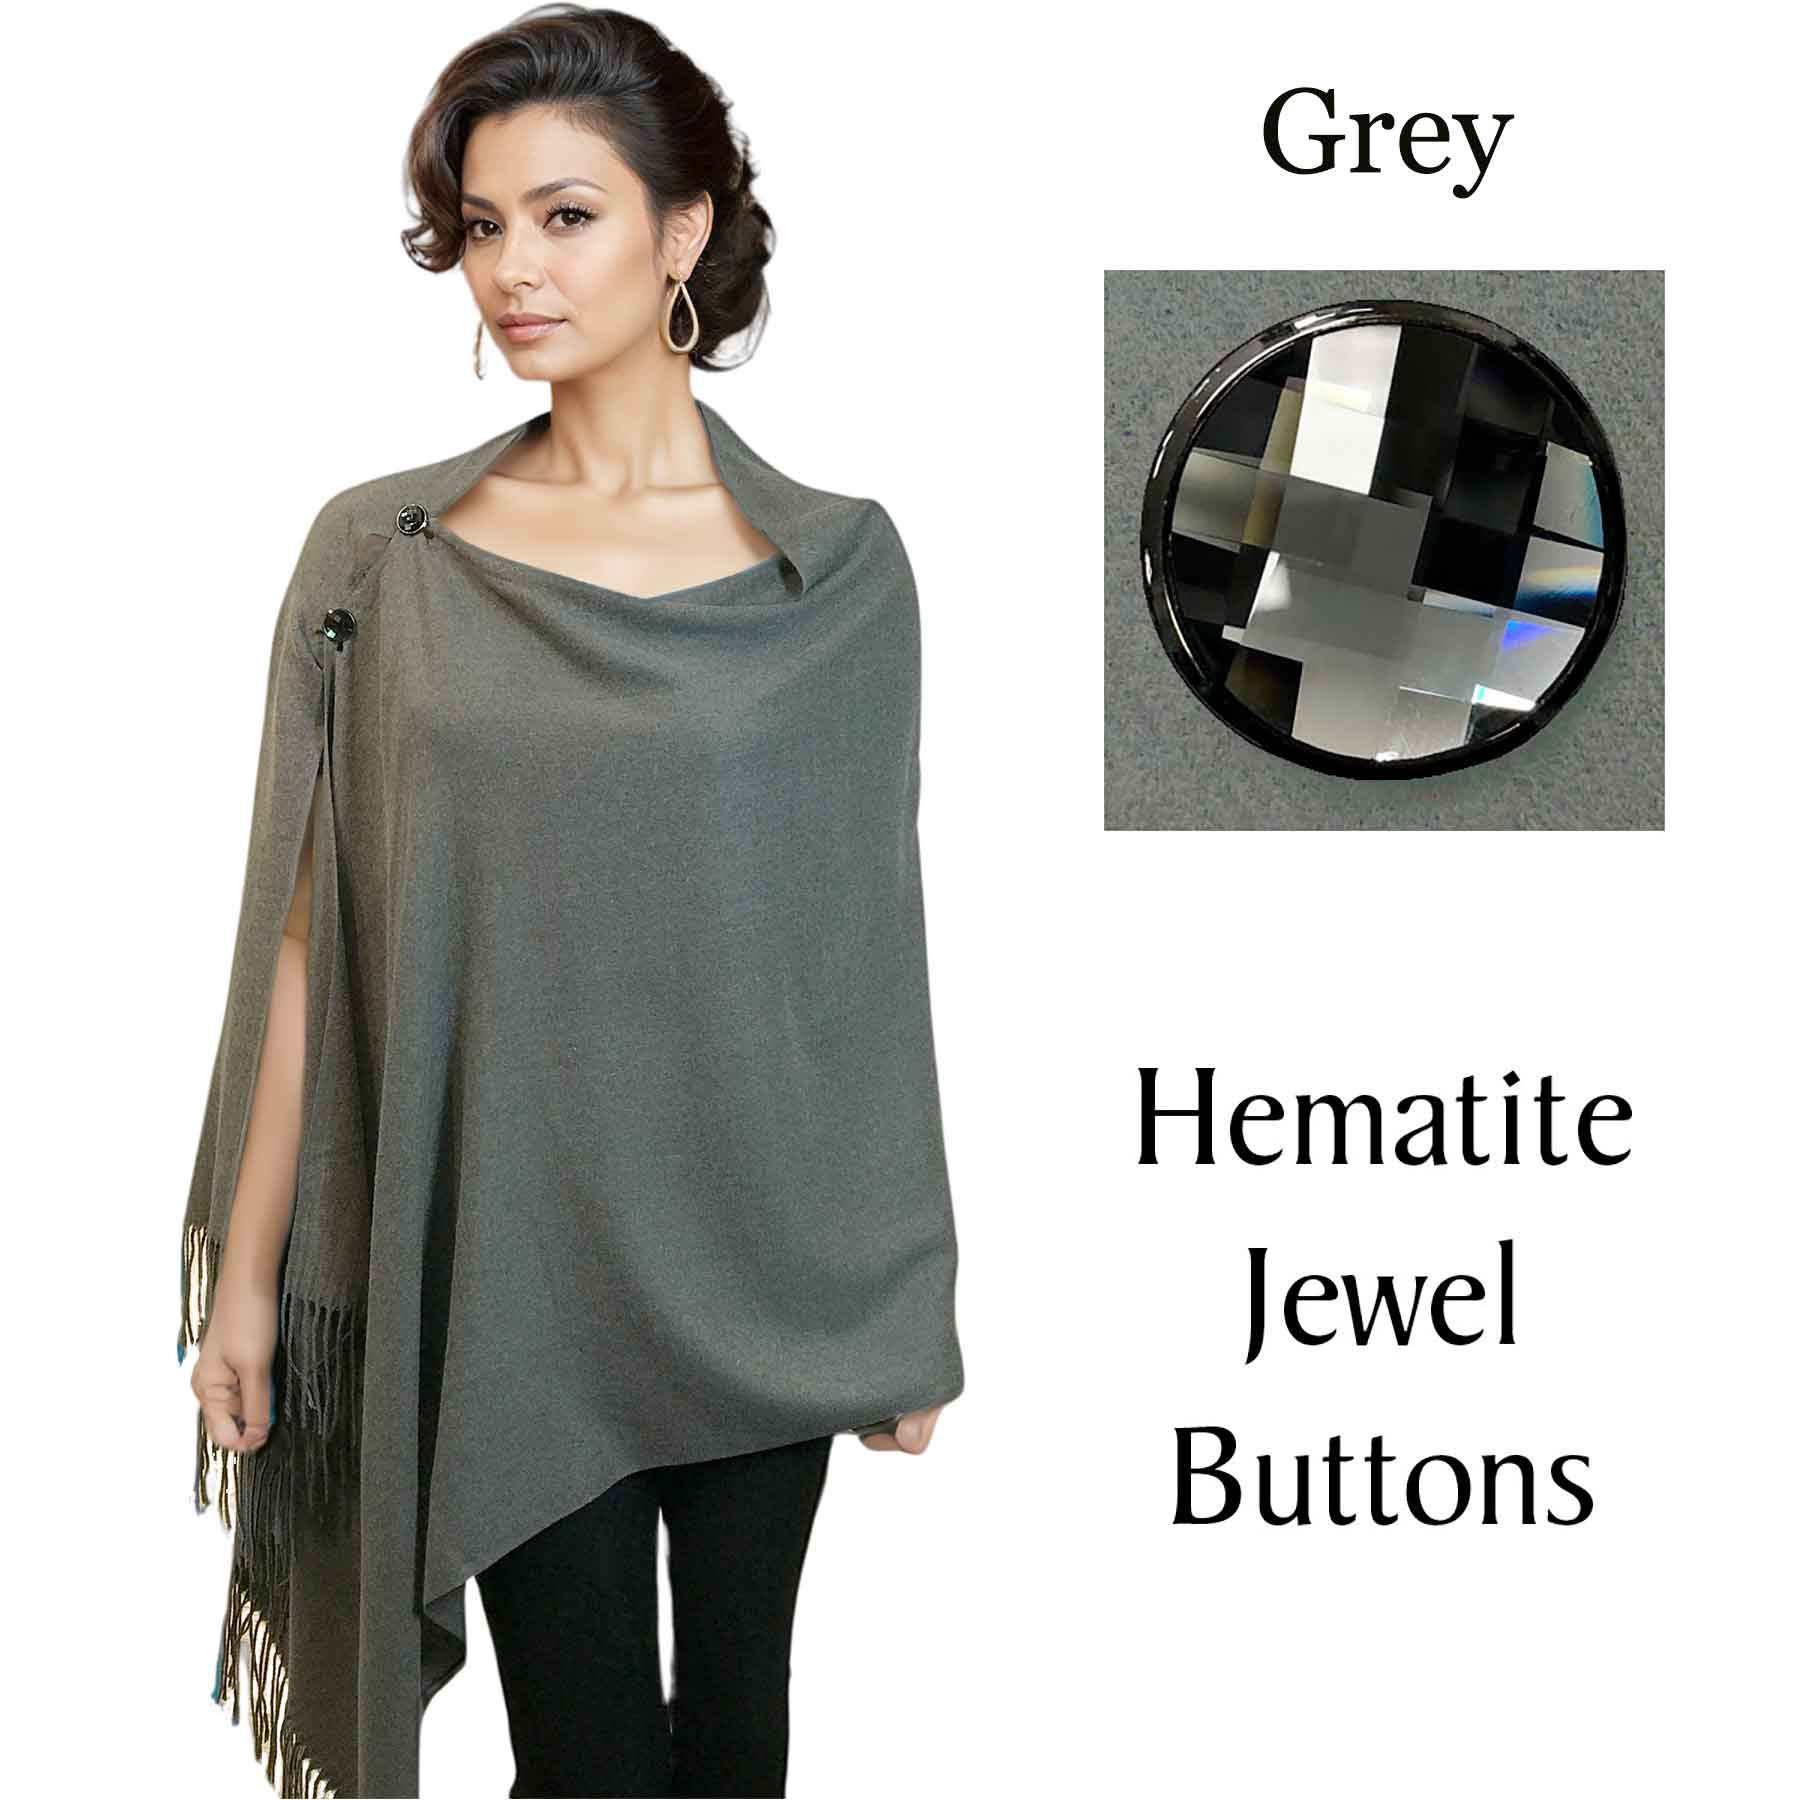 #07 Grey with Hematite Jewel Buttons